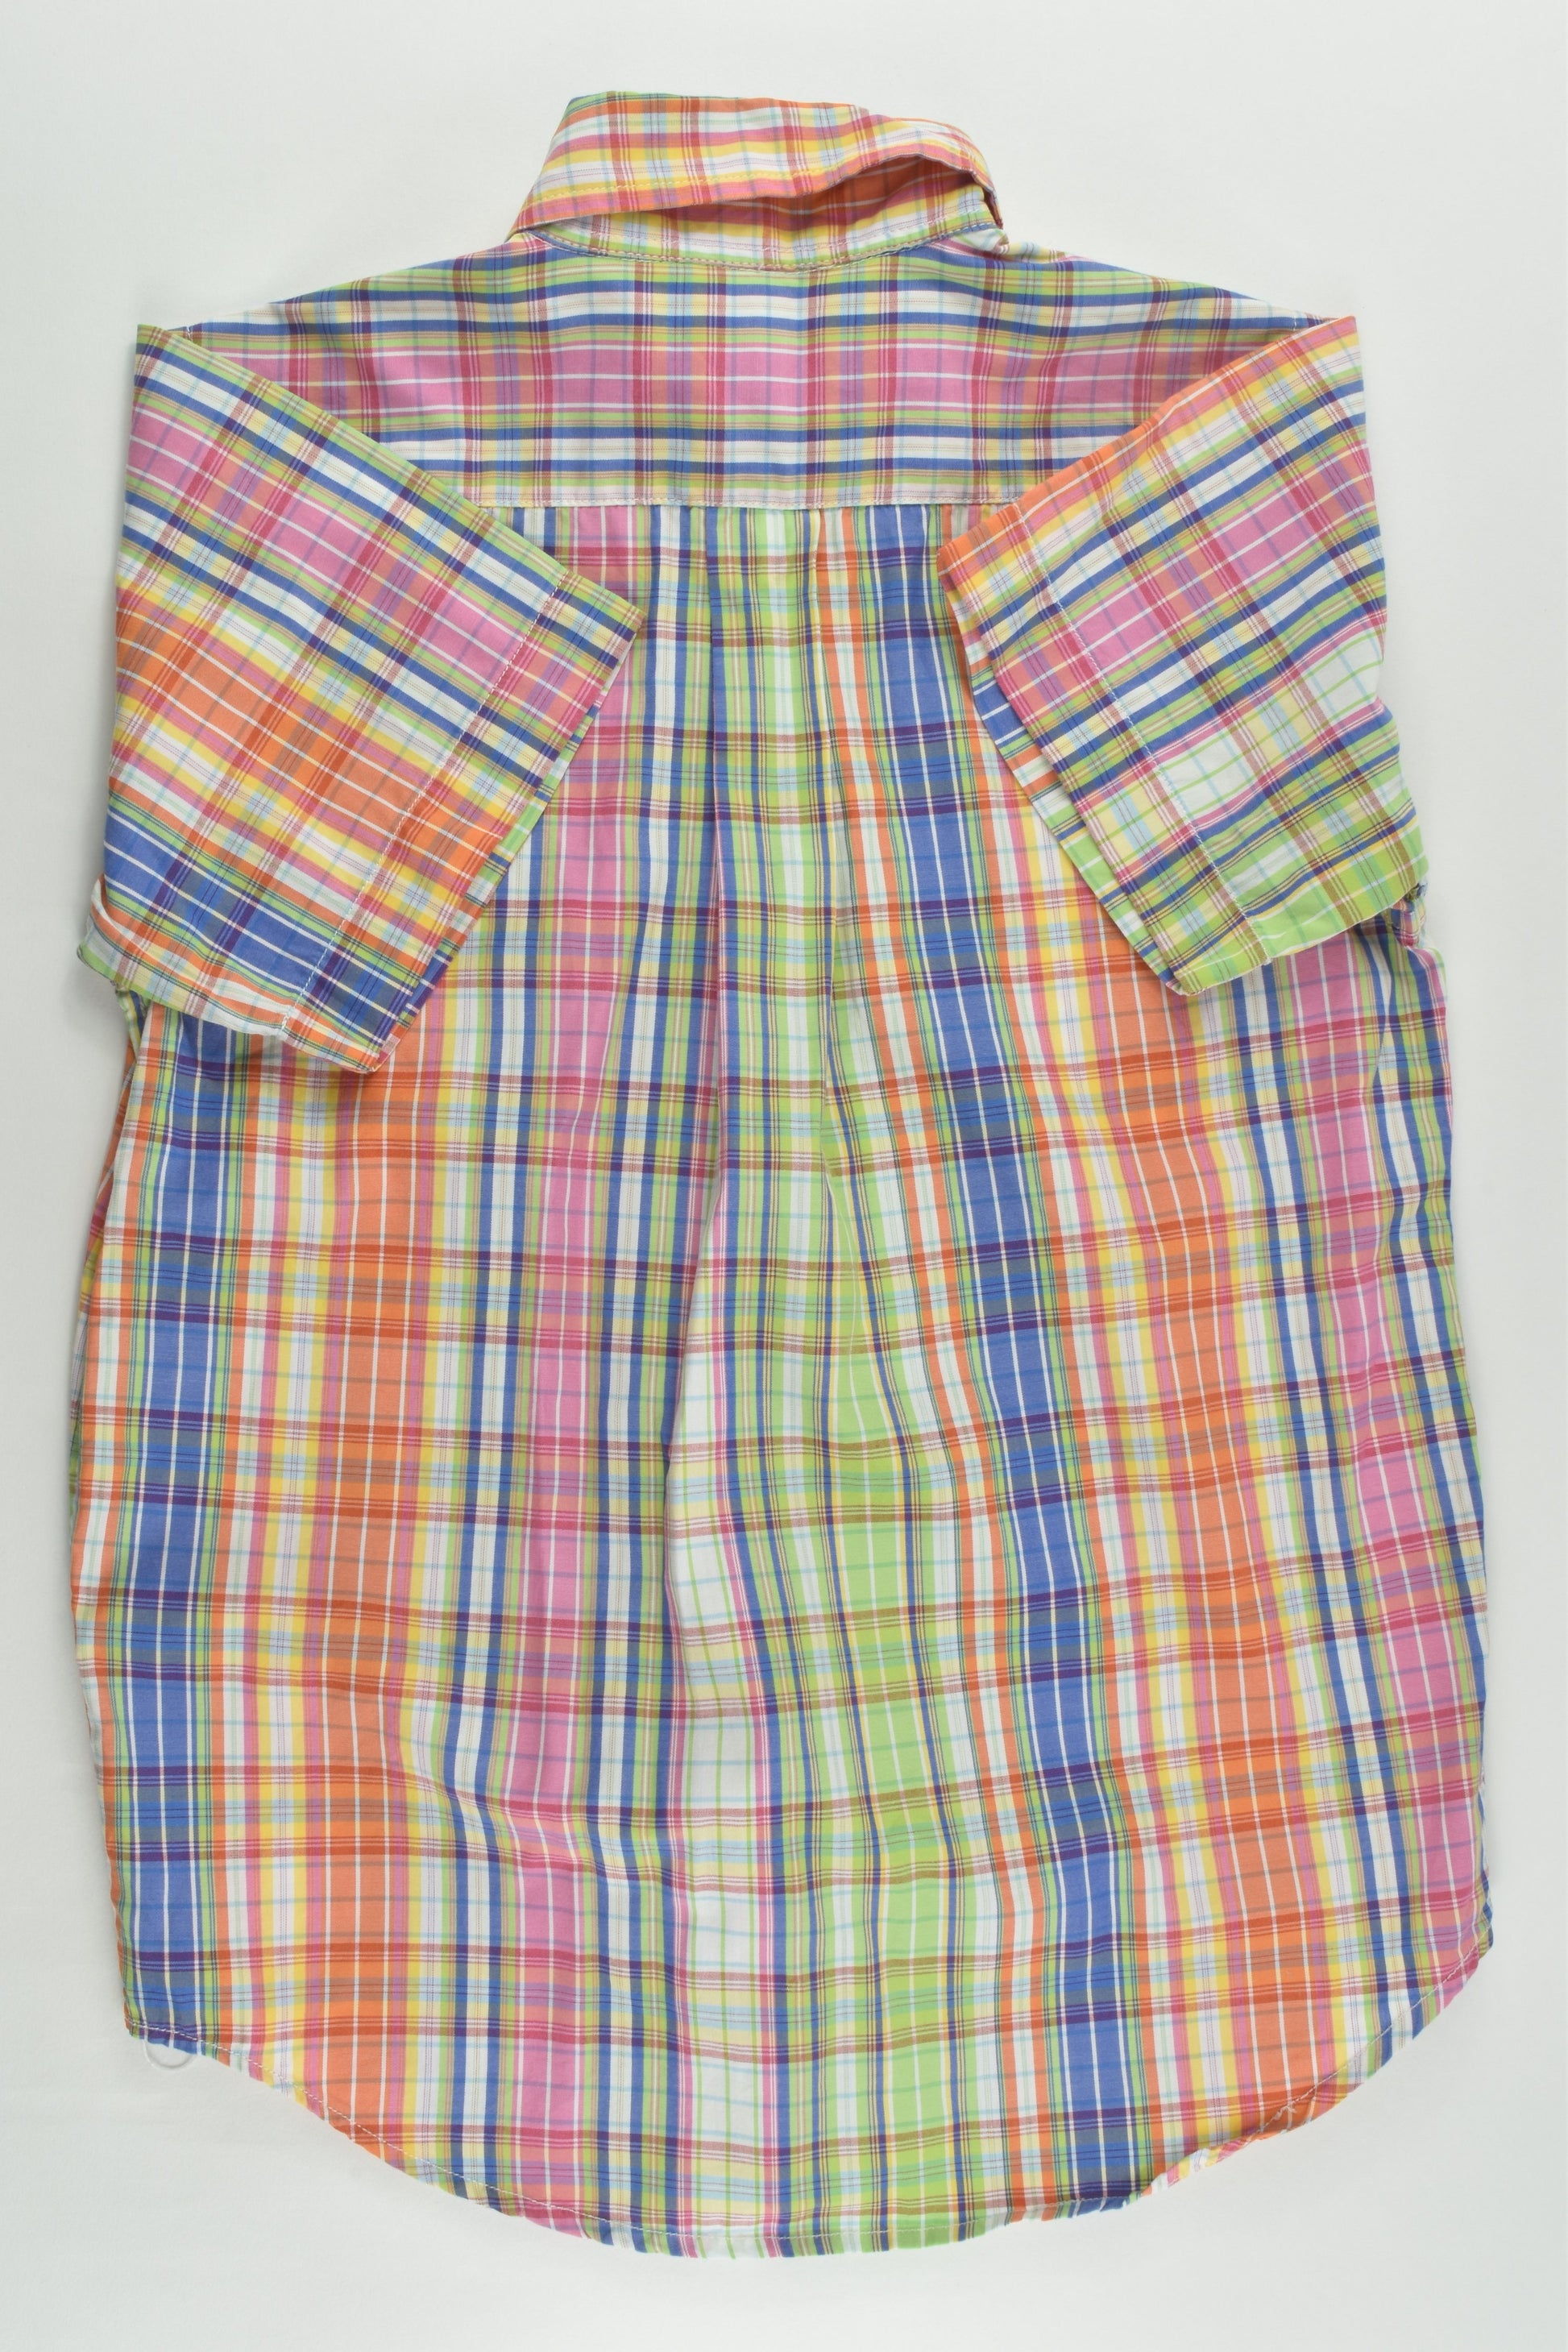 Ralph Lauren Size 5 Colorful Checked Shirt